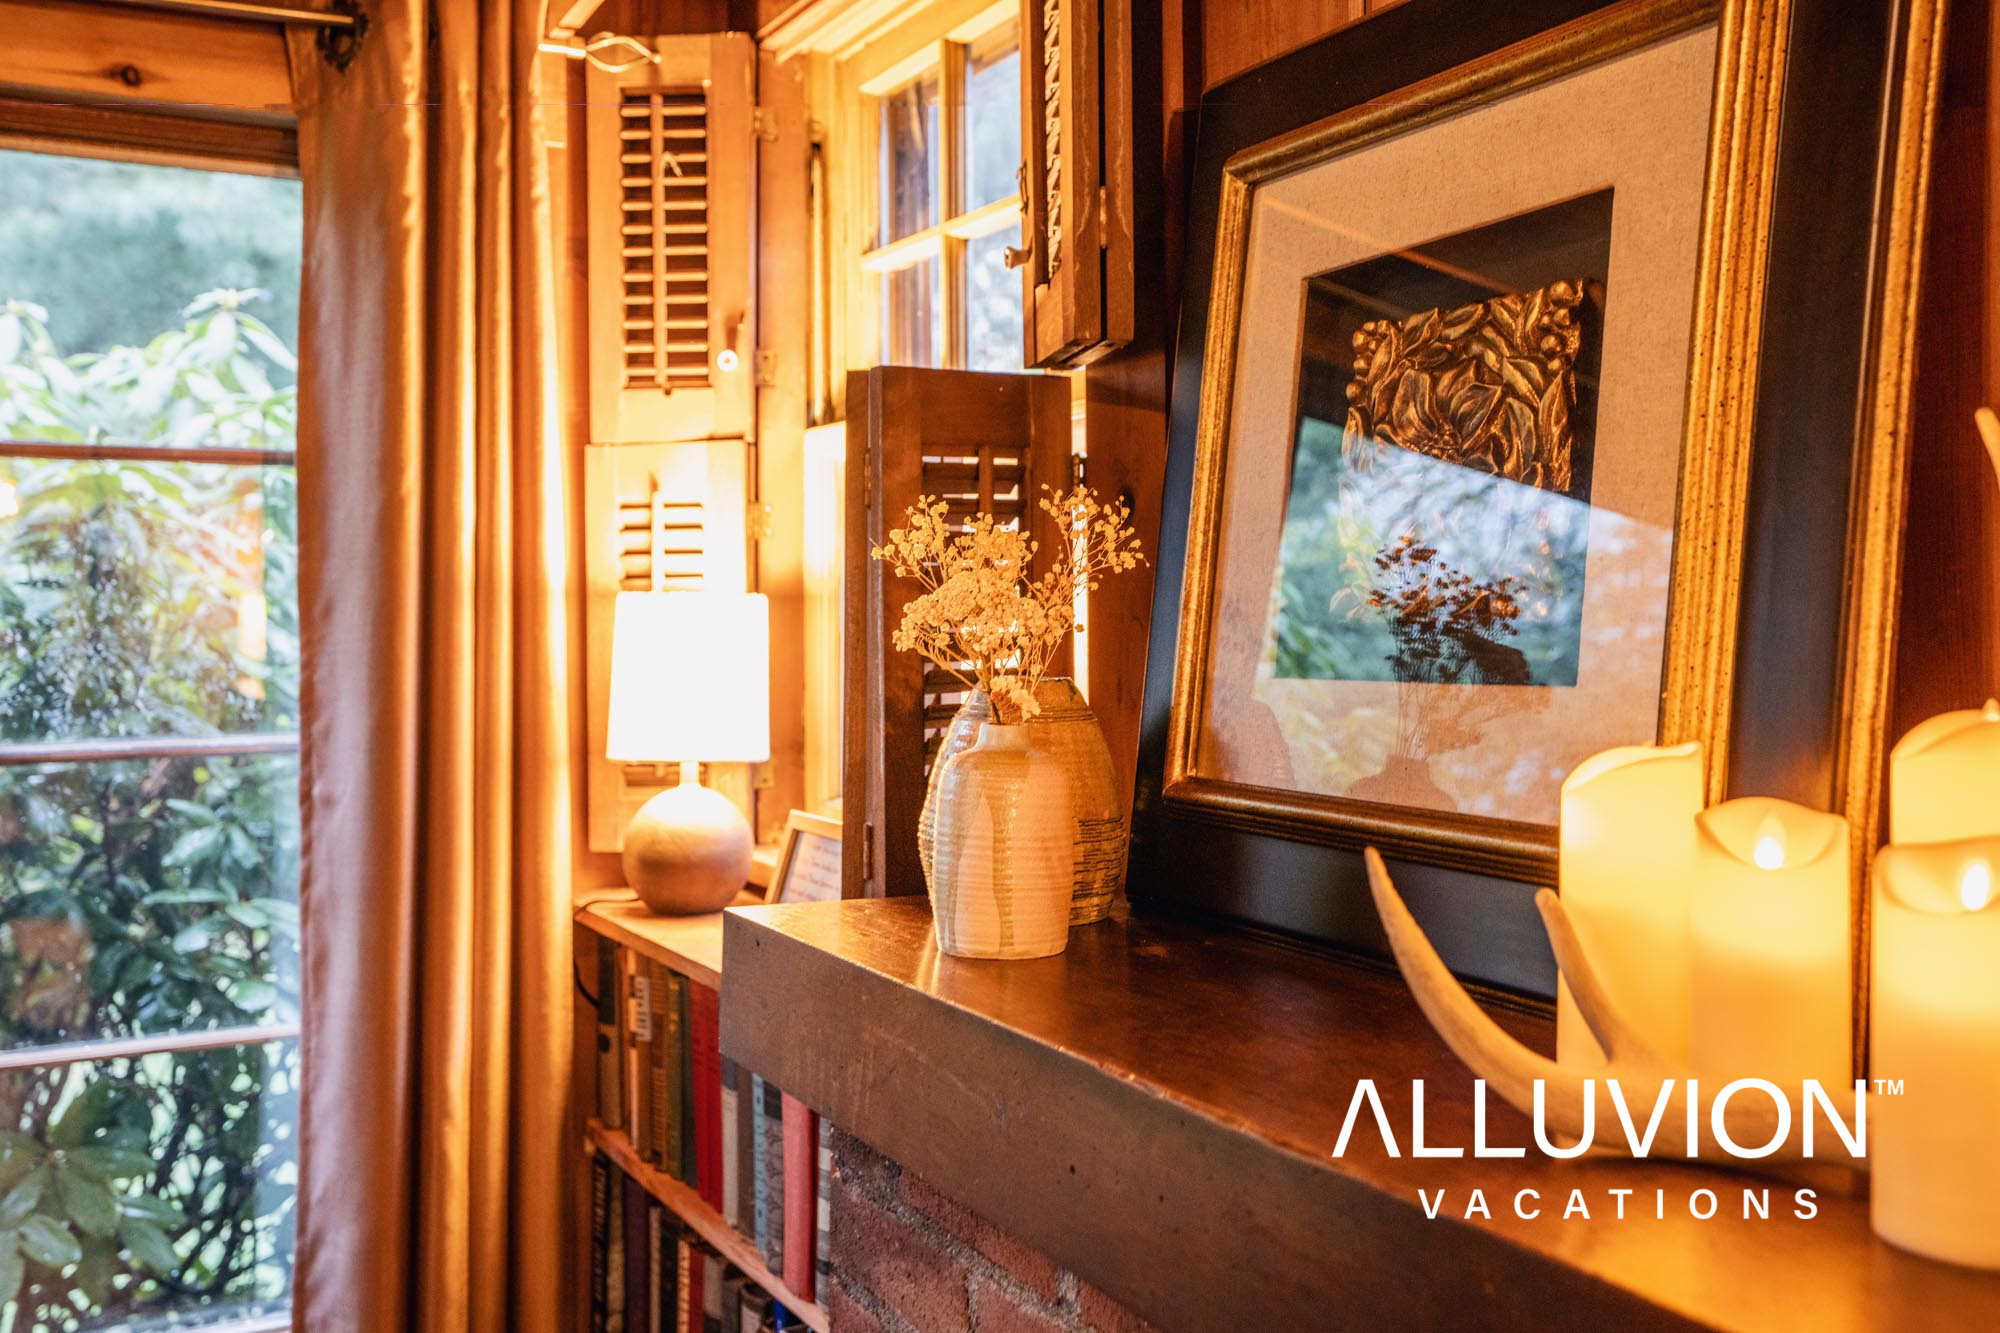 Experience a Fairytale Summer Getaway at Our Rustic Airbnb Retreat in Monroe, NY – Airbnb Photography by Alluvion Media